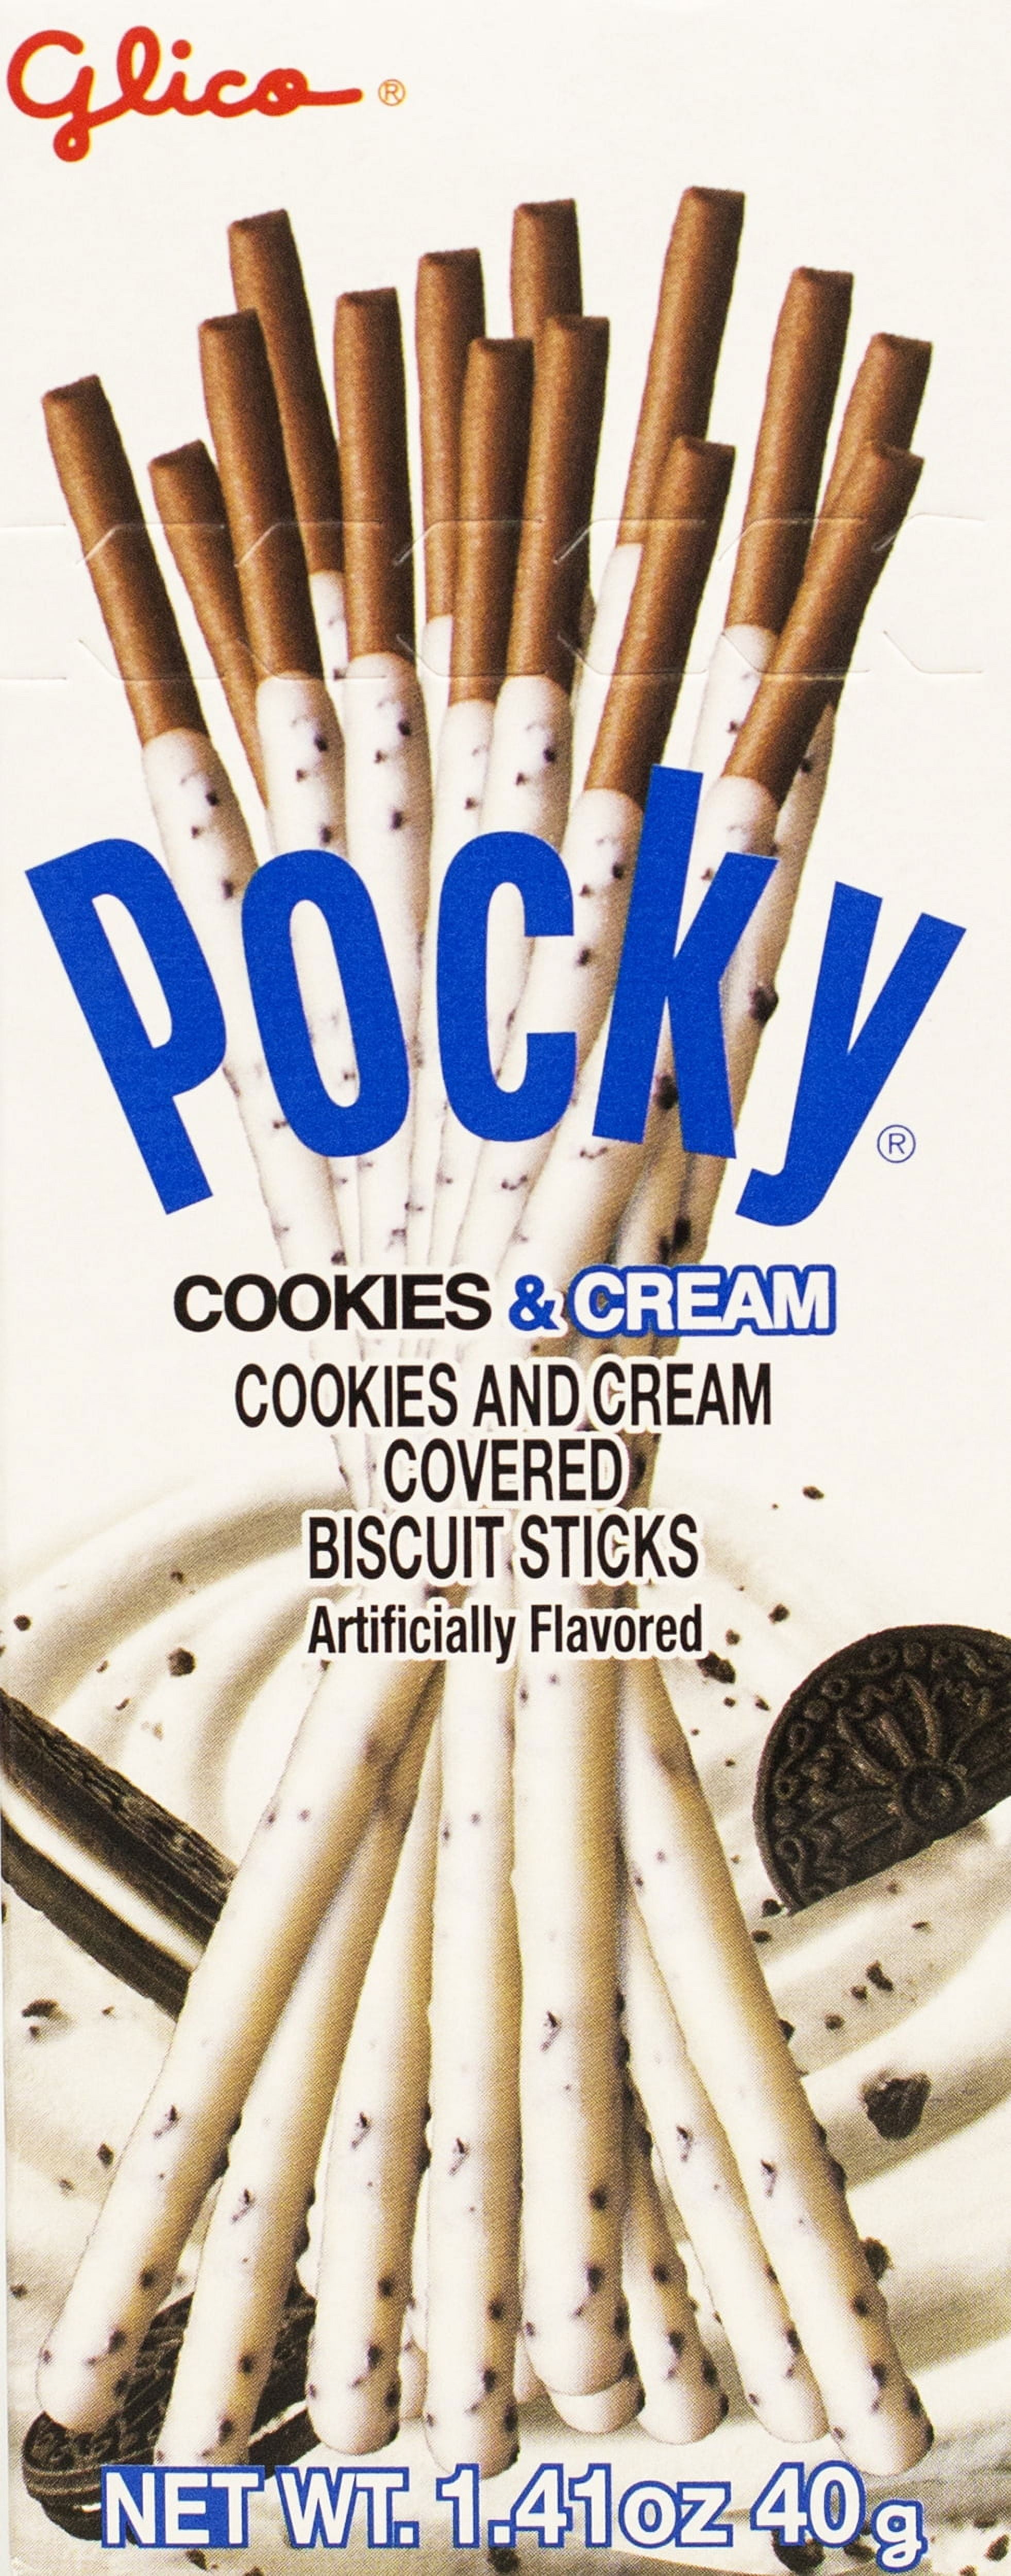 Glico 1.41 oz Pocky Cookies & Cream - Pack of 20 